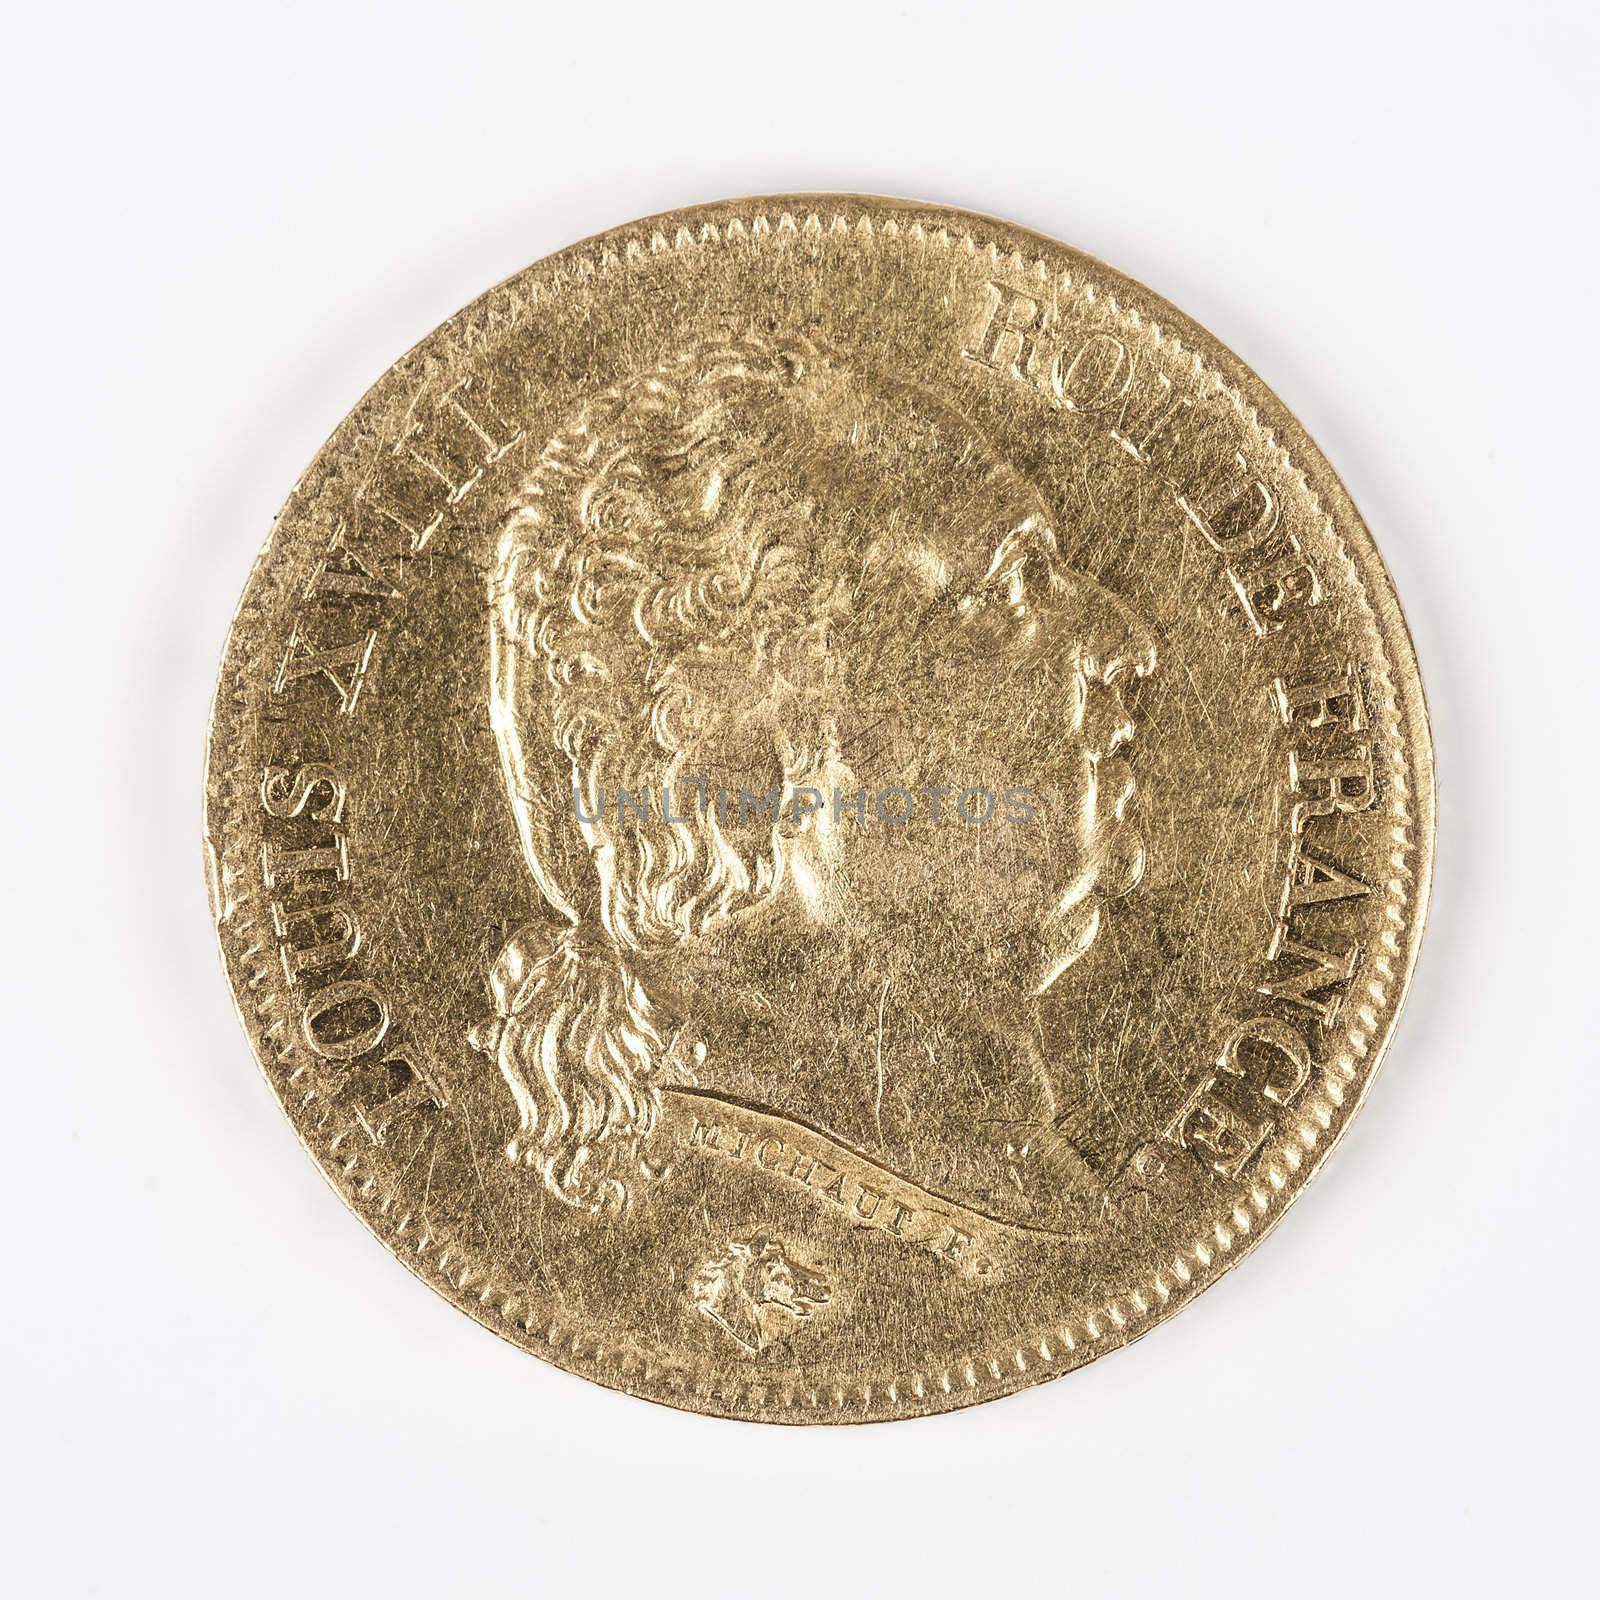 gold coin with Louis XVIII by vwalakte